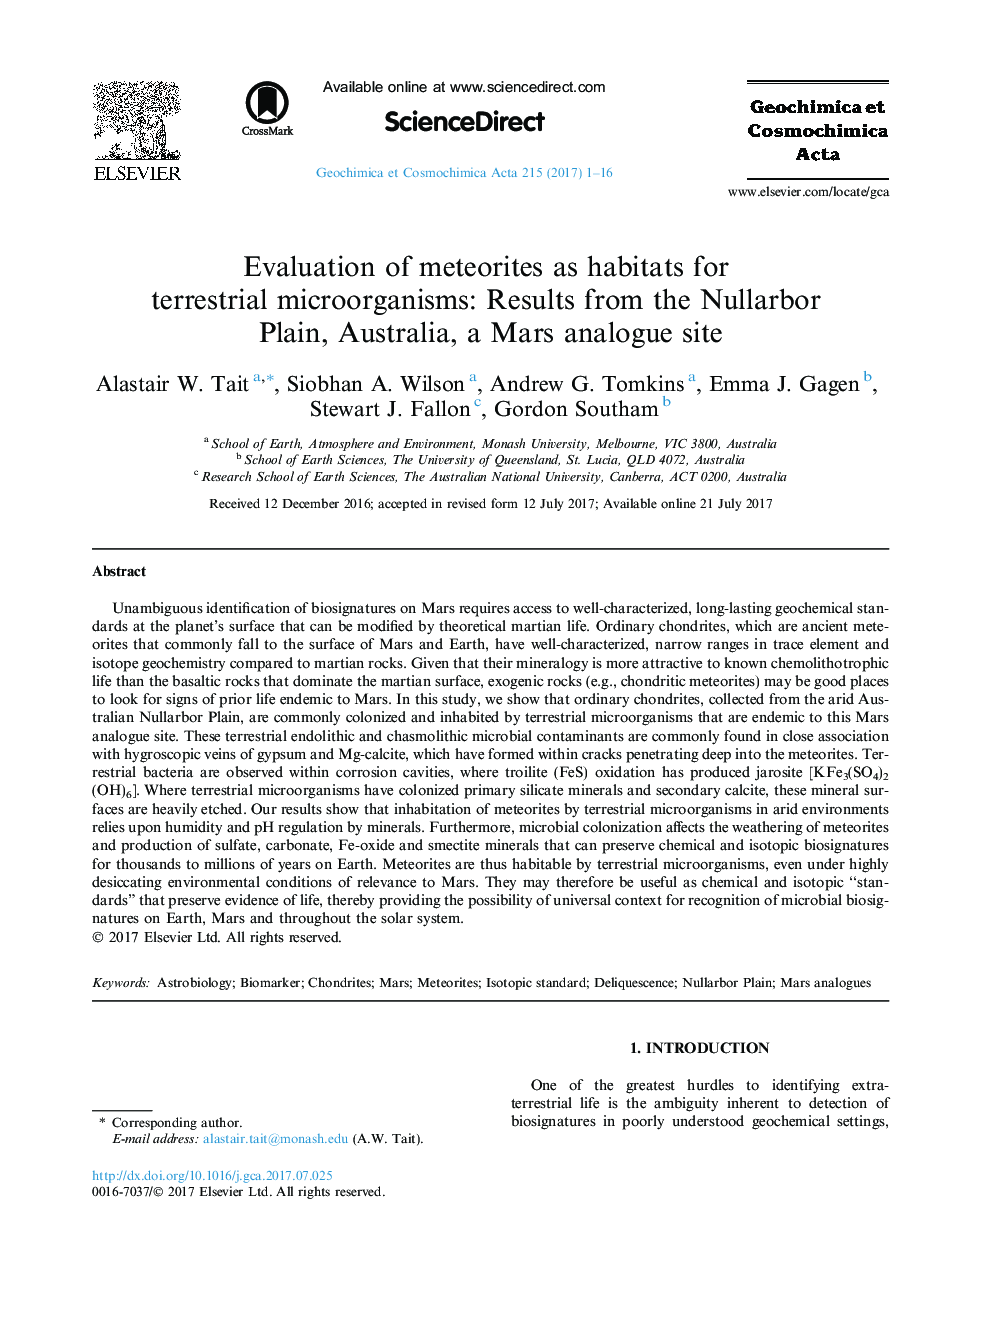 Evaluation of meteorites as habitats for terrestrial microorganisms: Results from the Nullarbor Plain, Australia, a Mars analogue site